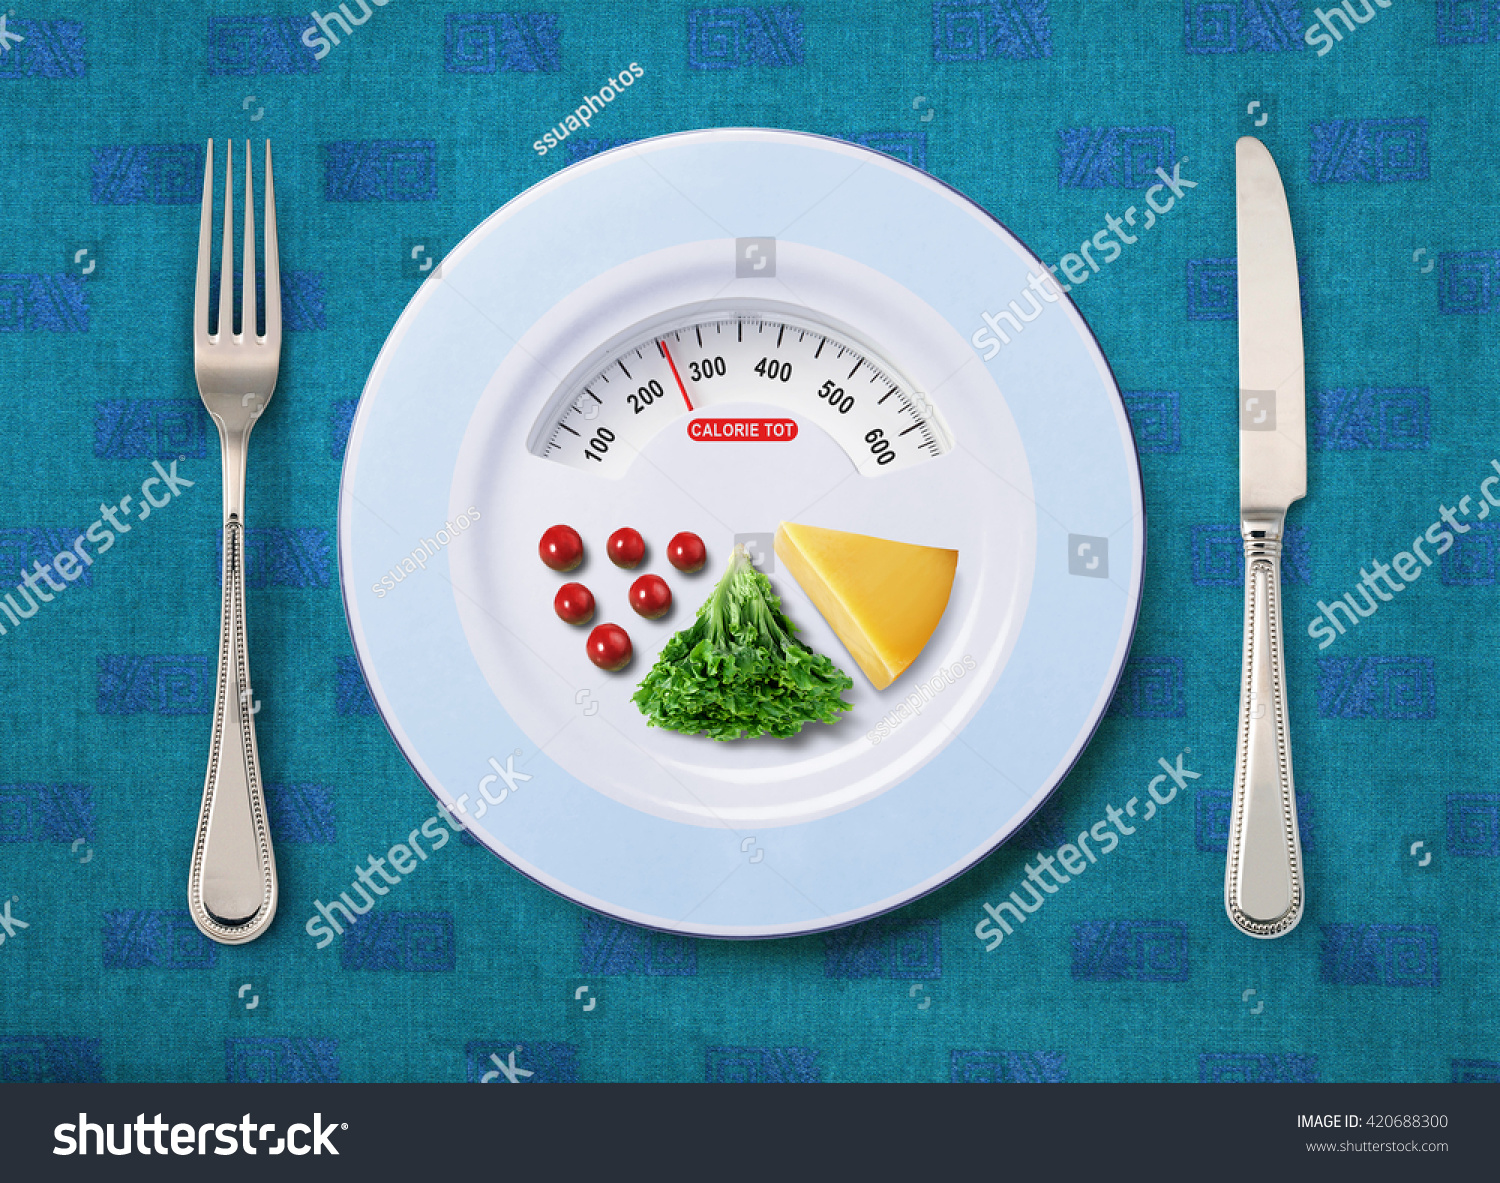 view of calorie tot in food that on white plate #420688300